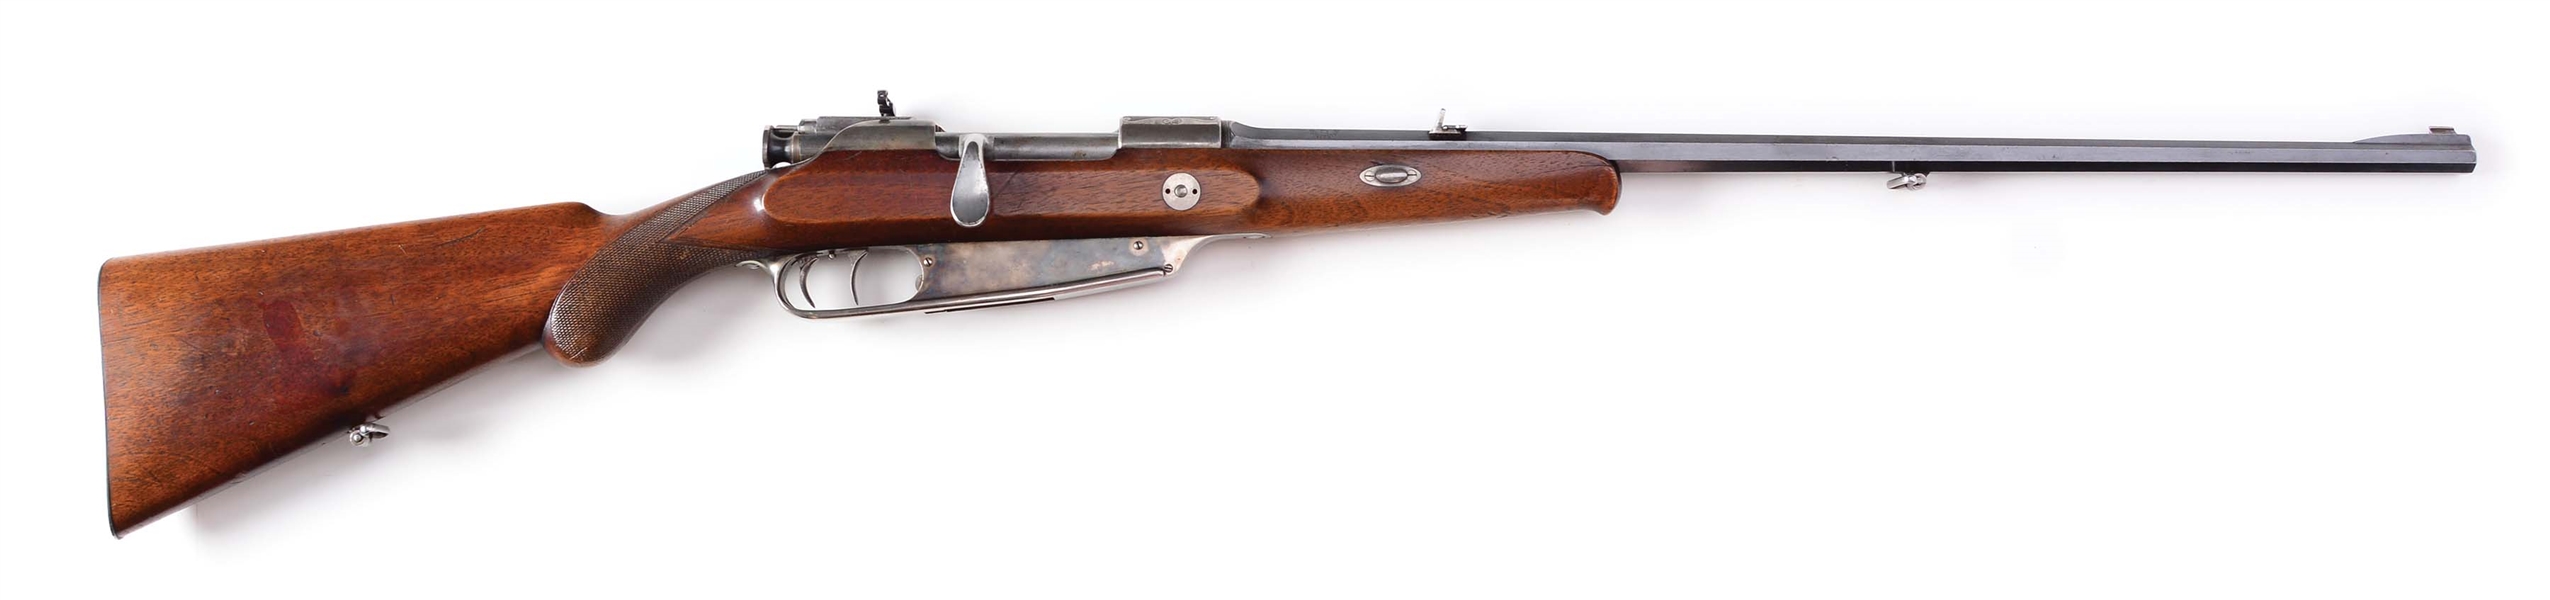 (C) C.G. HAENEL MANNLICHER SPORTING RIFLE WITH SCARCE PIVOTING BOLT STOP SIGHT.